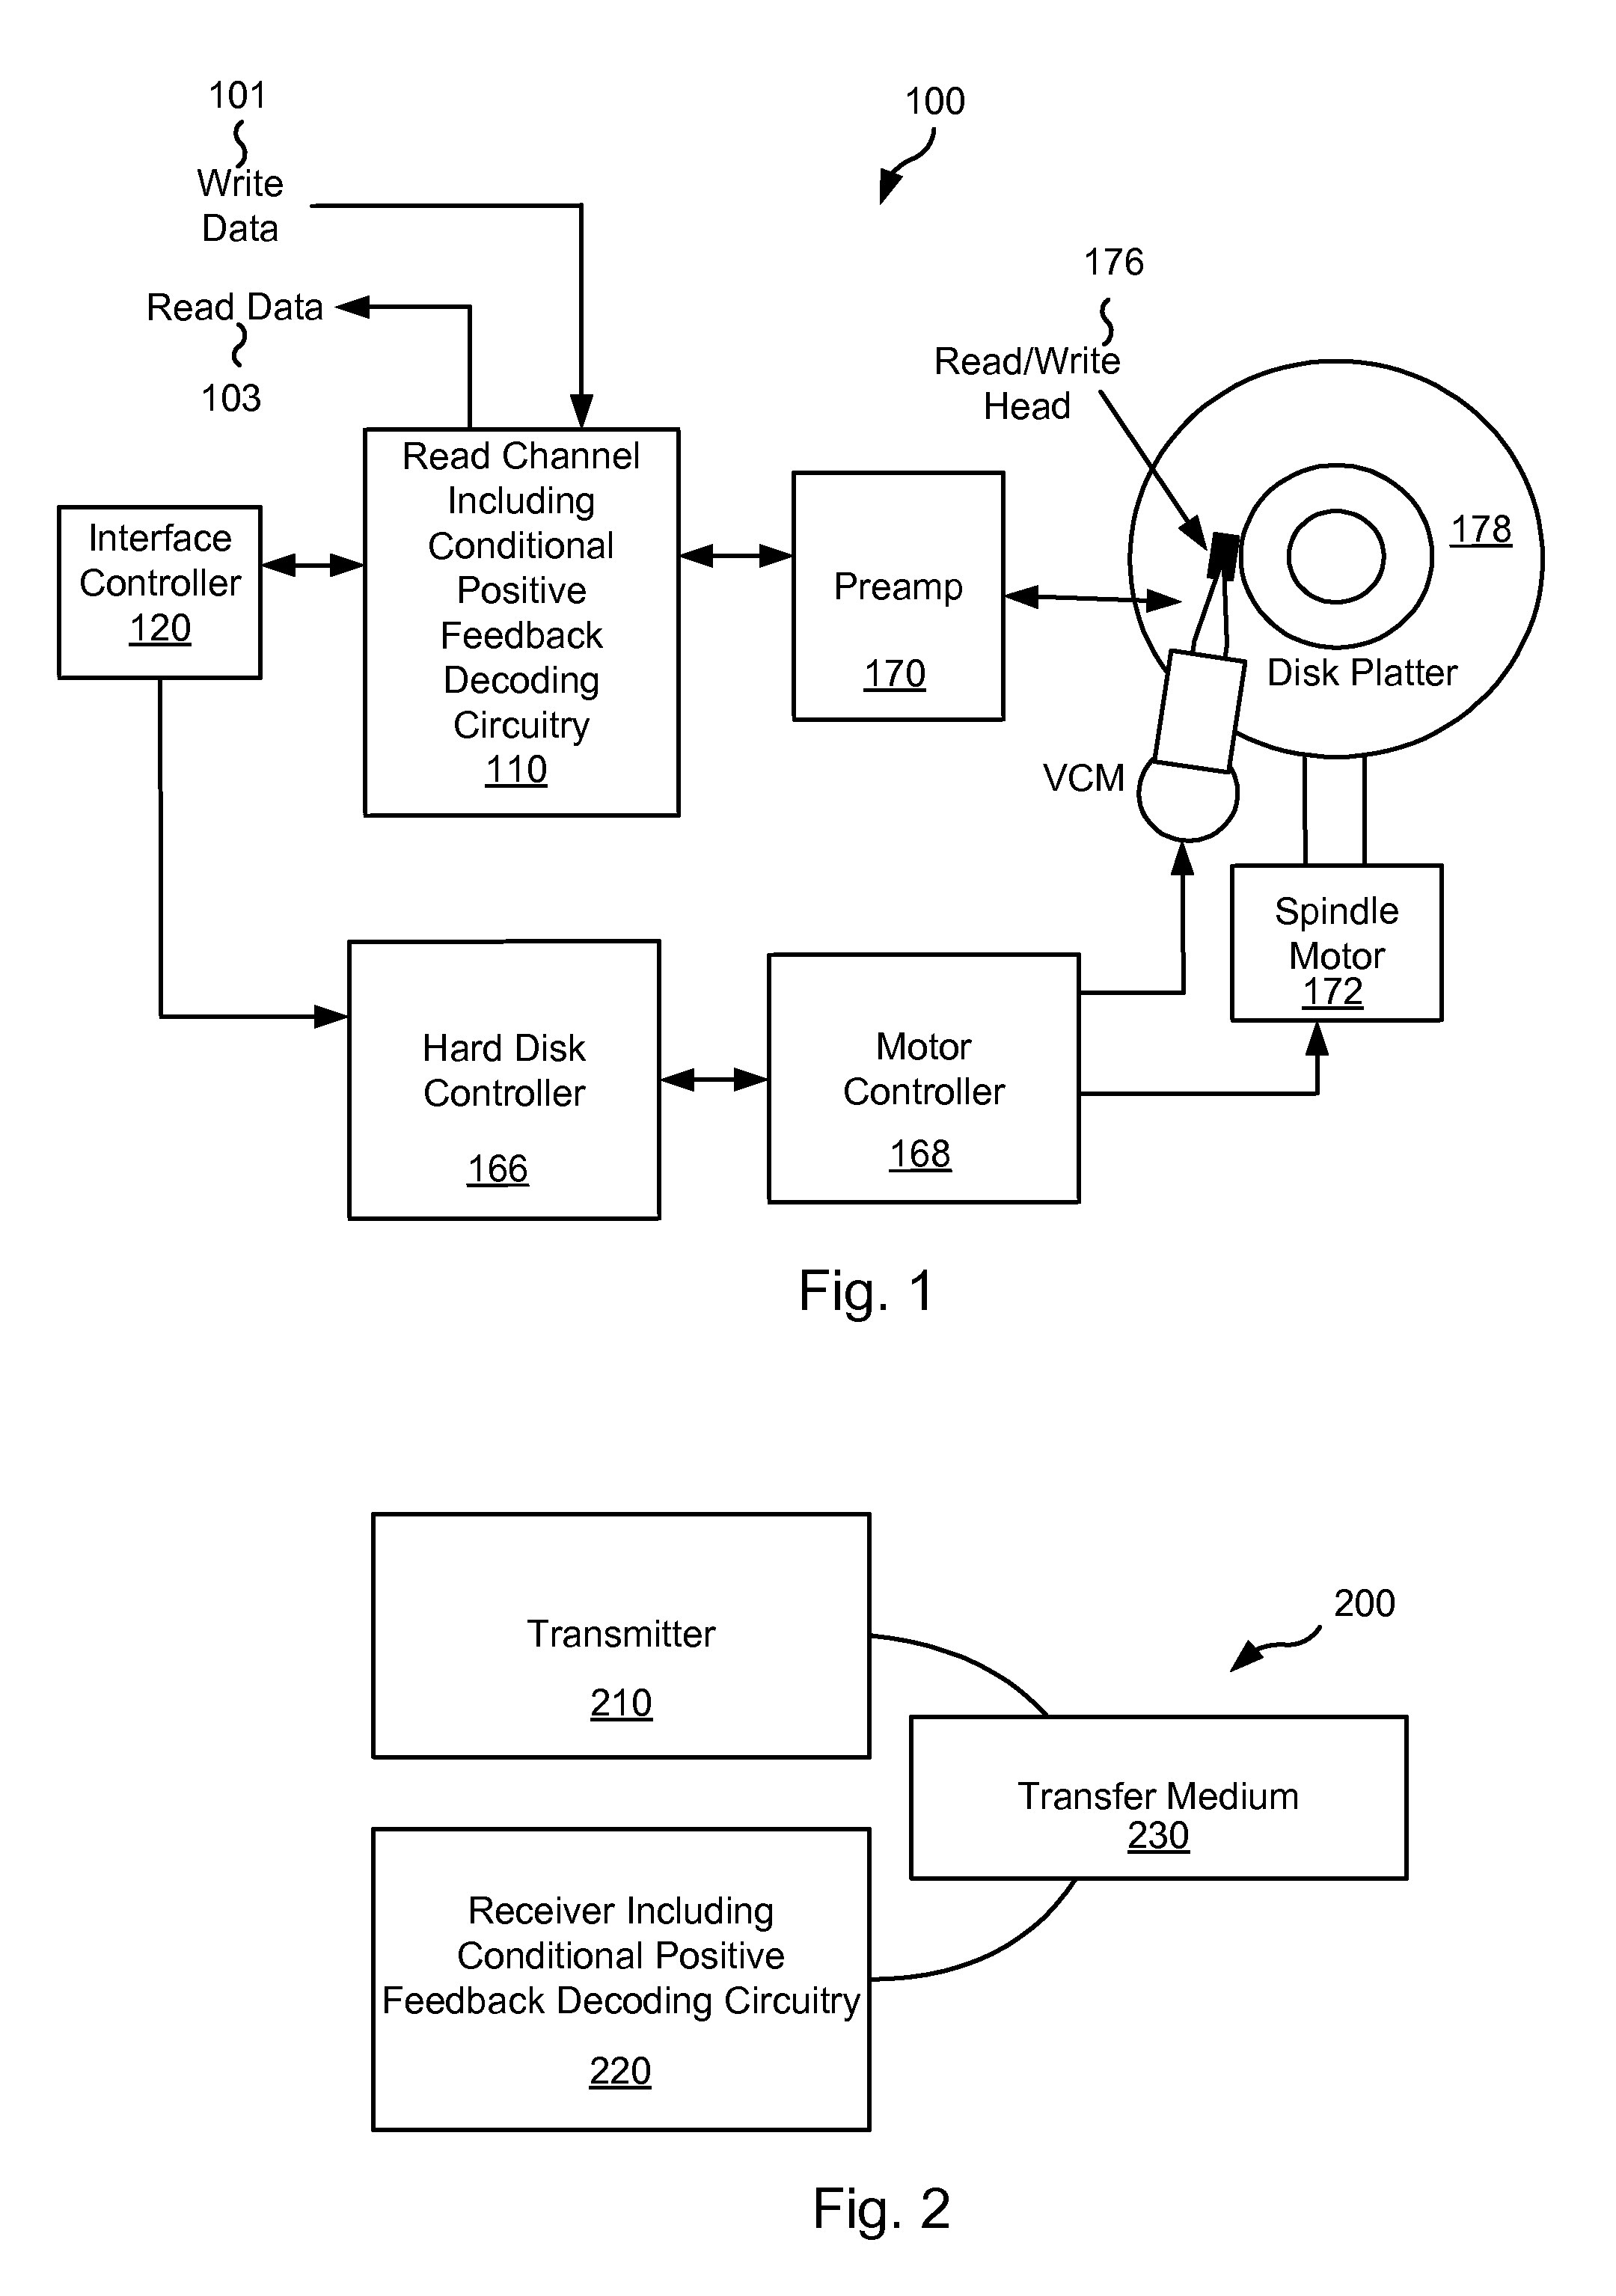 Systems and methods for conditional positive feedback data decoding